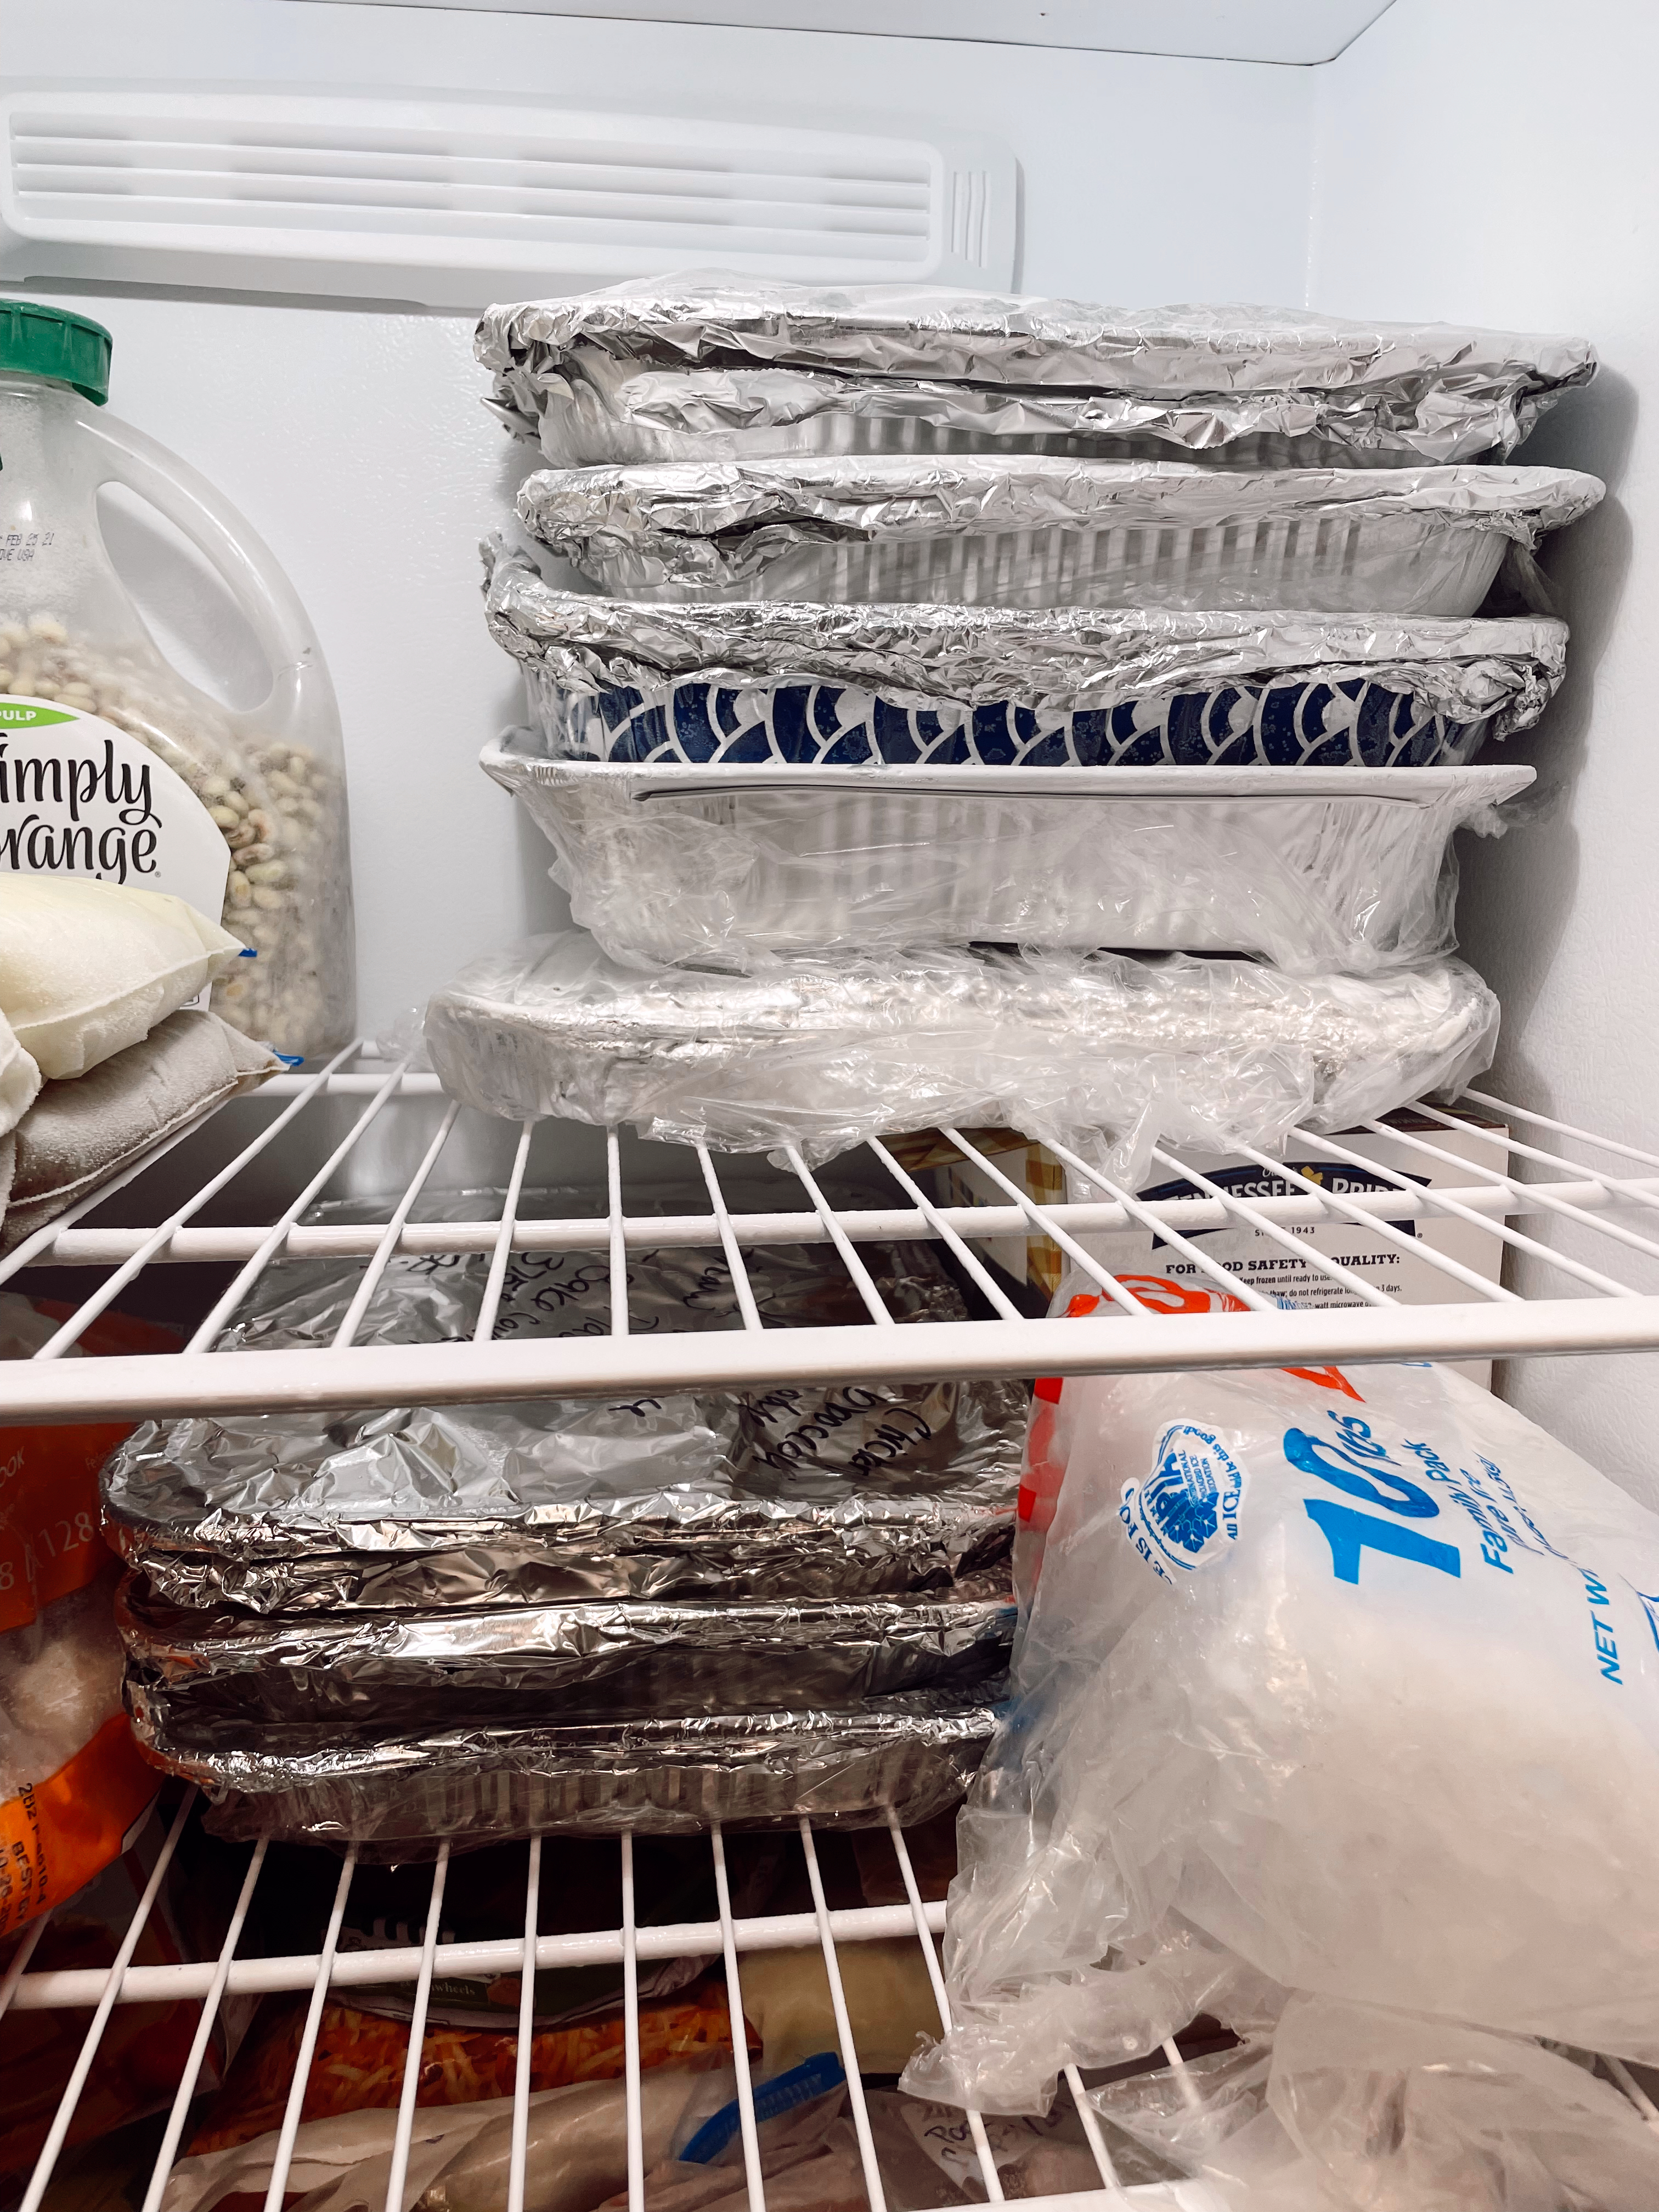 Freezer meals in foil pans in freezer on shelf with various other products. 